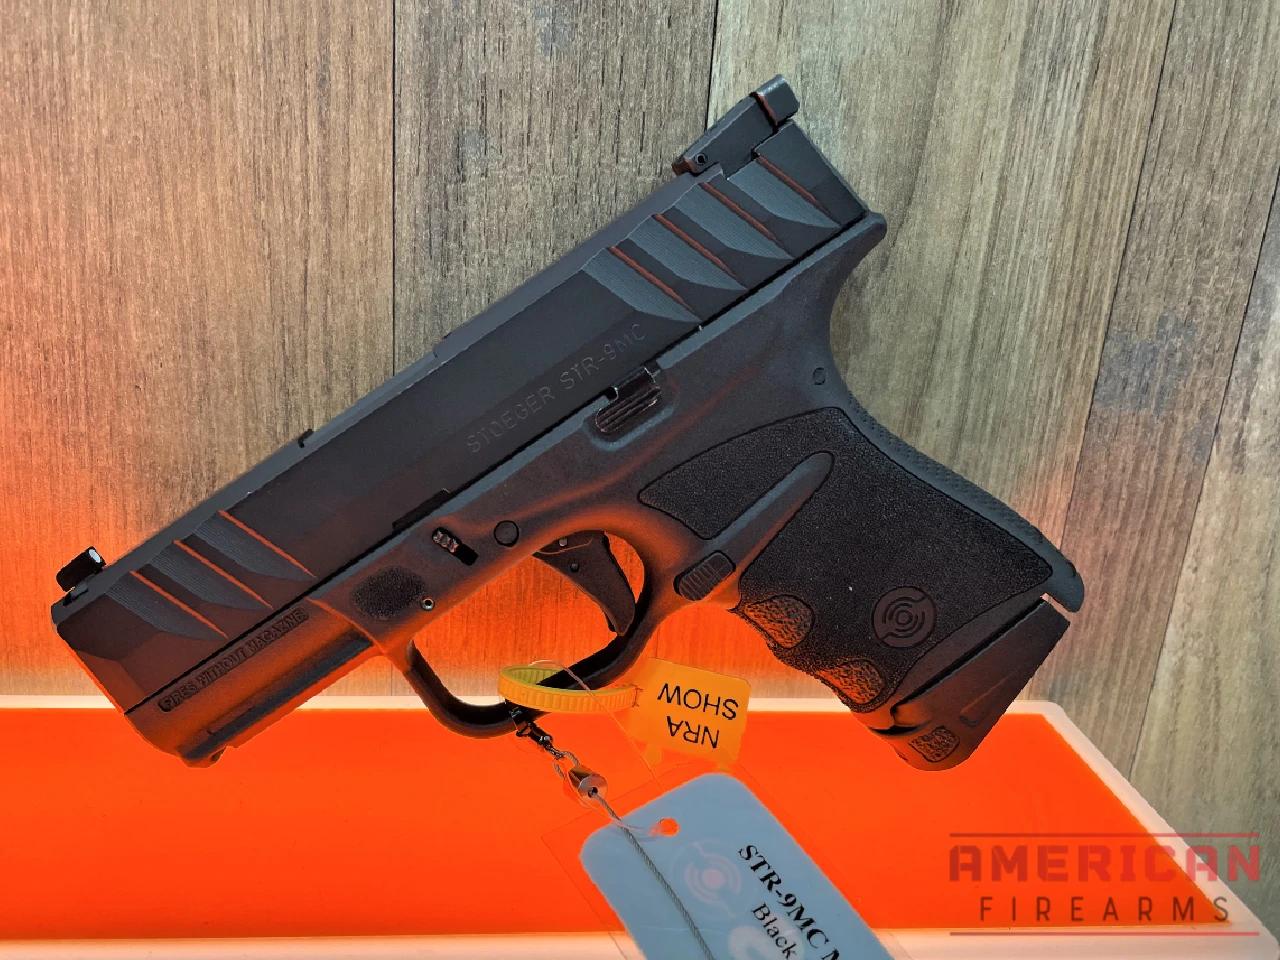 The specs on the Stoeger STR-9MC are comparable to the P365/P365X but the price is better, with an ask in the $399 range.